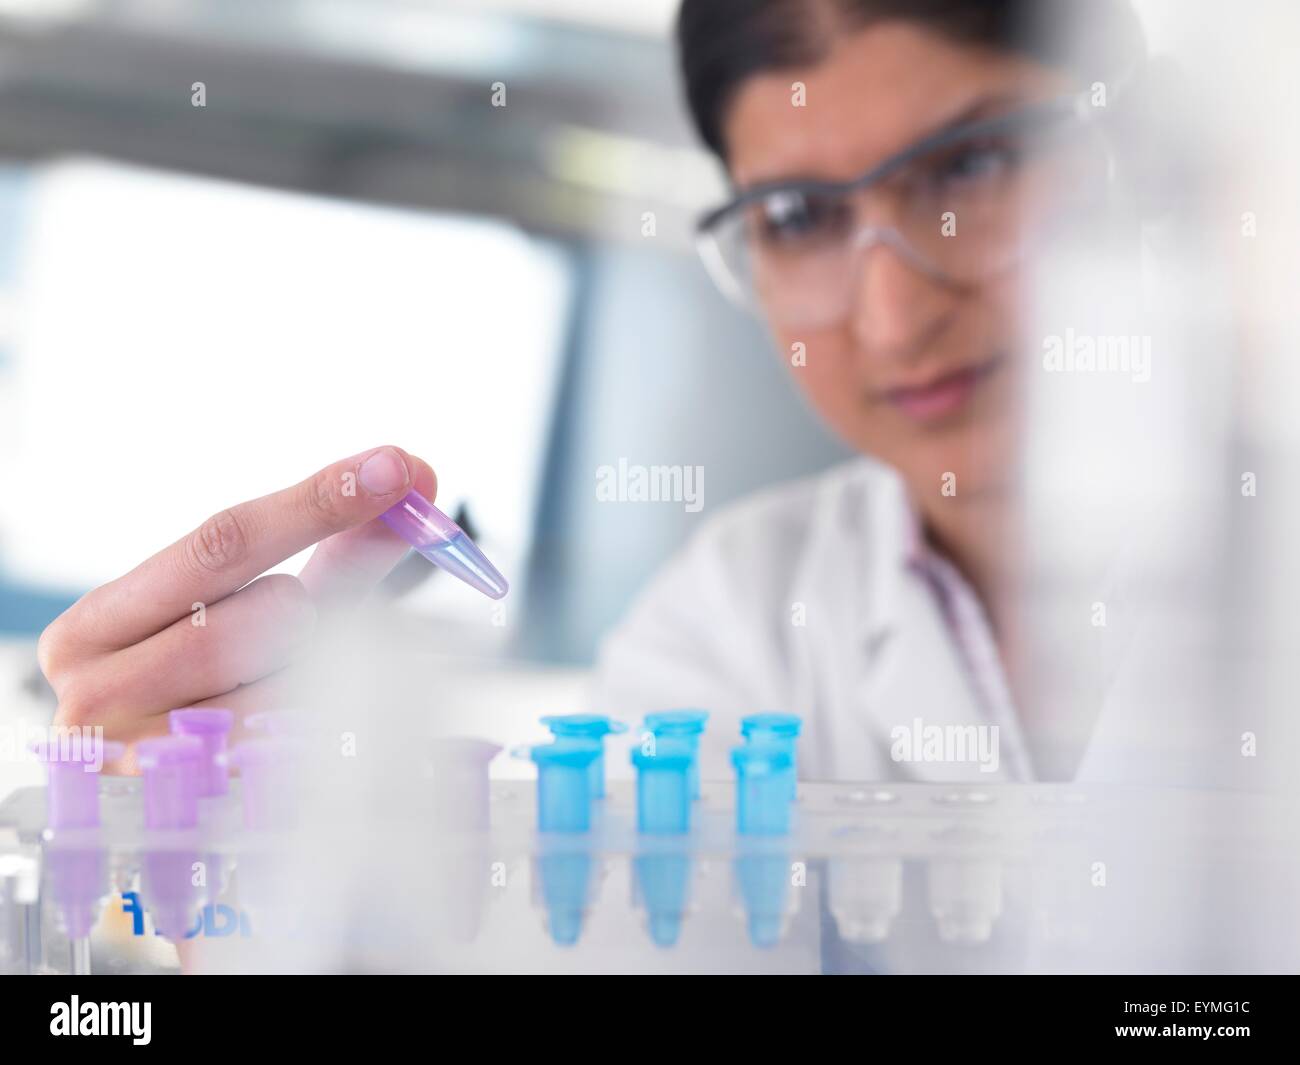 PROPERTY RELEASED. MODEL RELEASED. Female Asian scientist holding a sample ready for analytical testing. Stock Photo